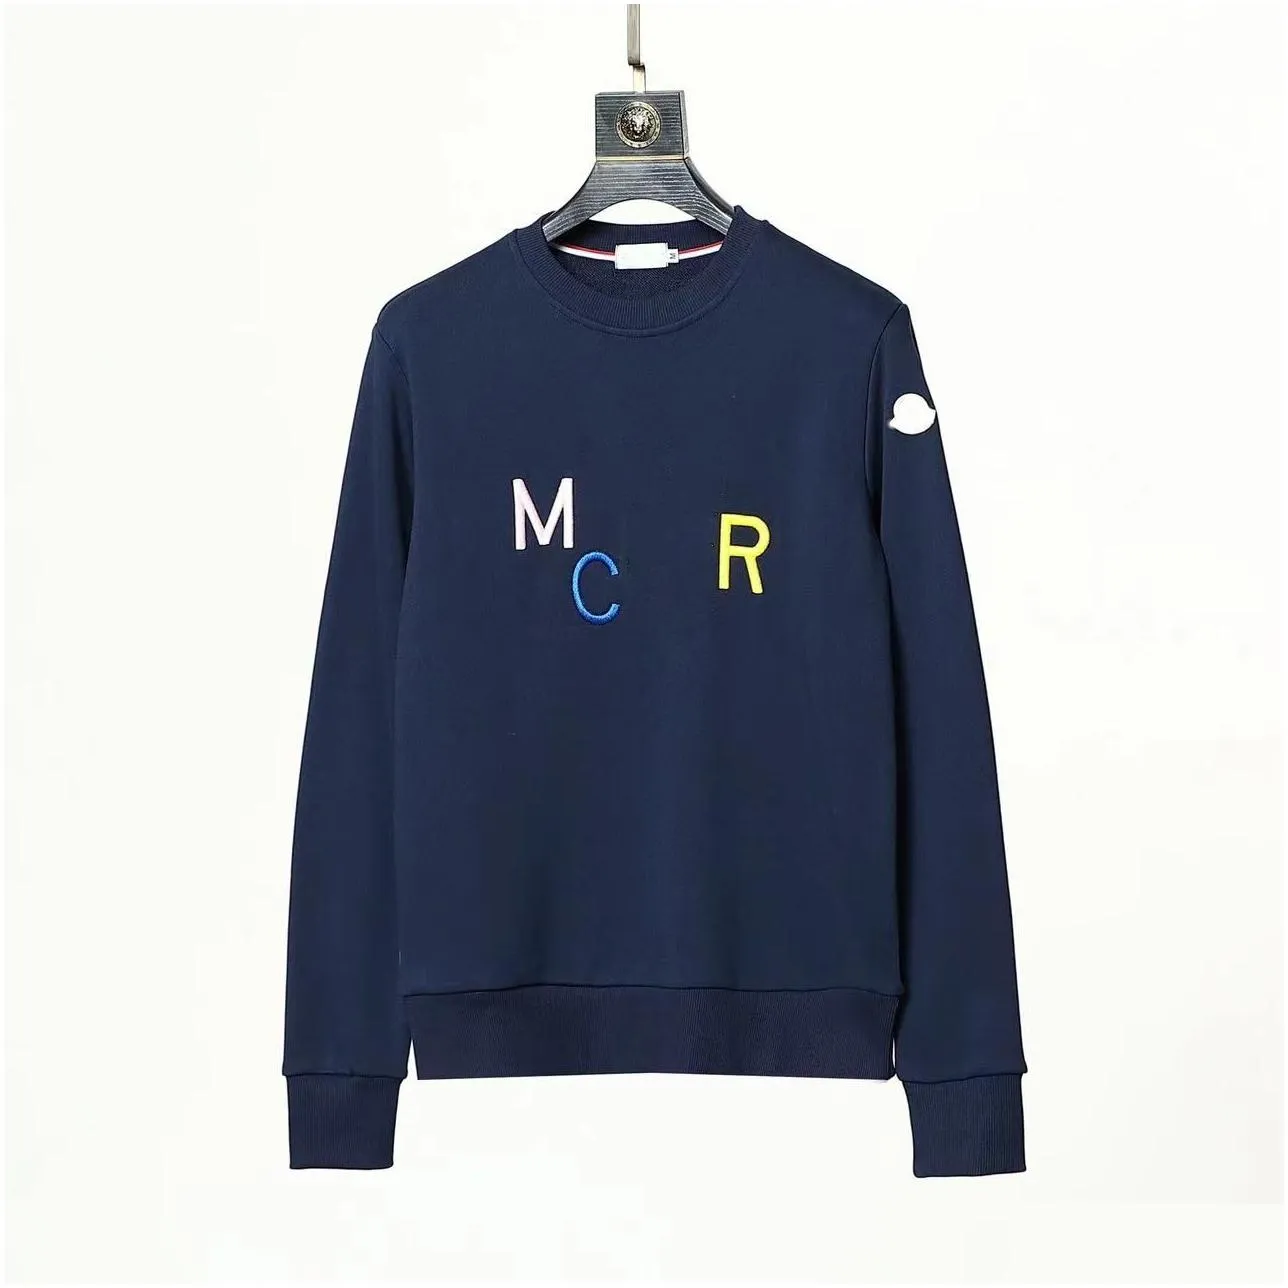 Designer hoodie monclair hoodie mens hoodie fashion Pullover High Quality Men Women Letter Print Complete tags Embroidered Printing Wholesale 2 pieces 10%